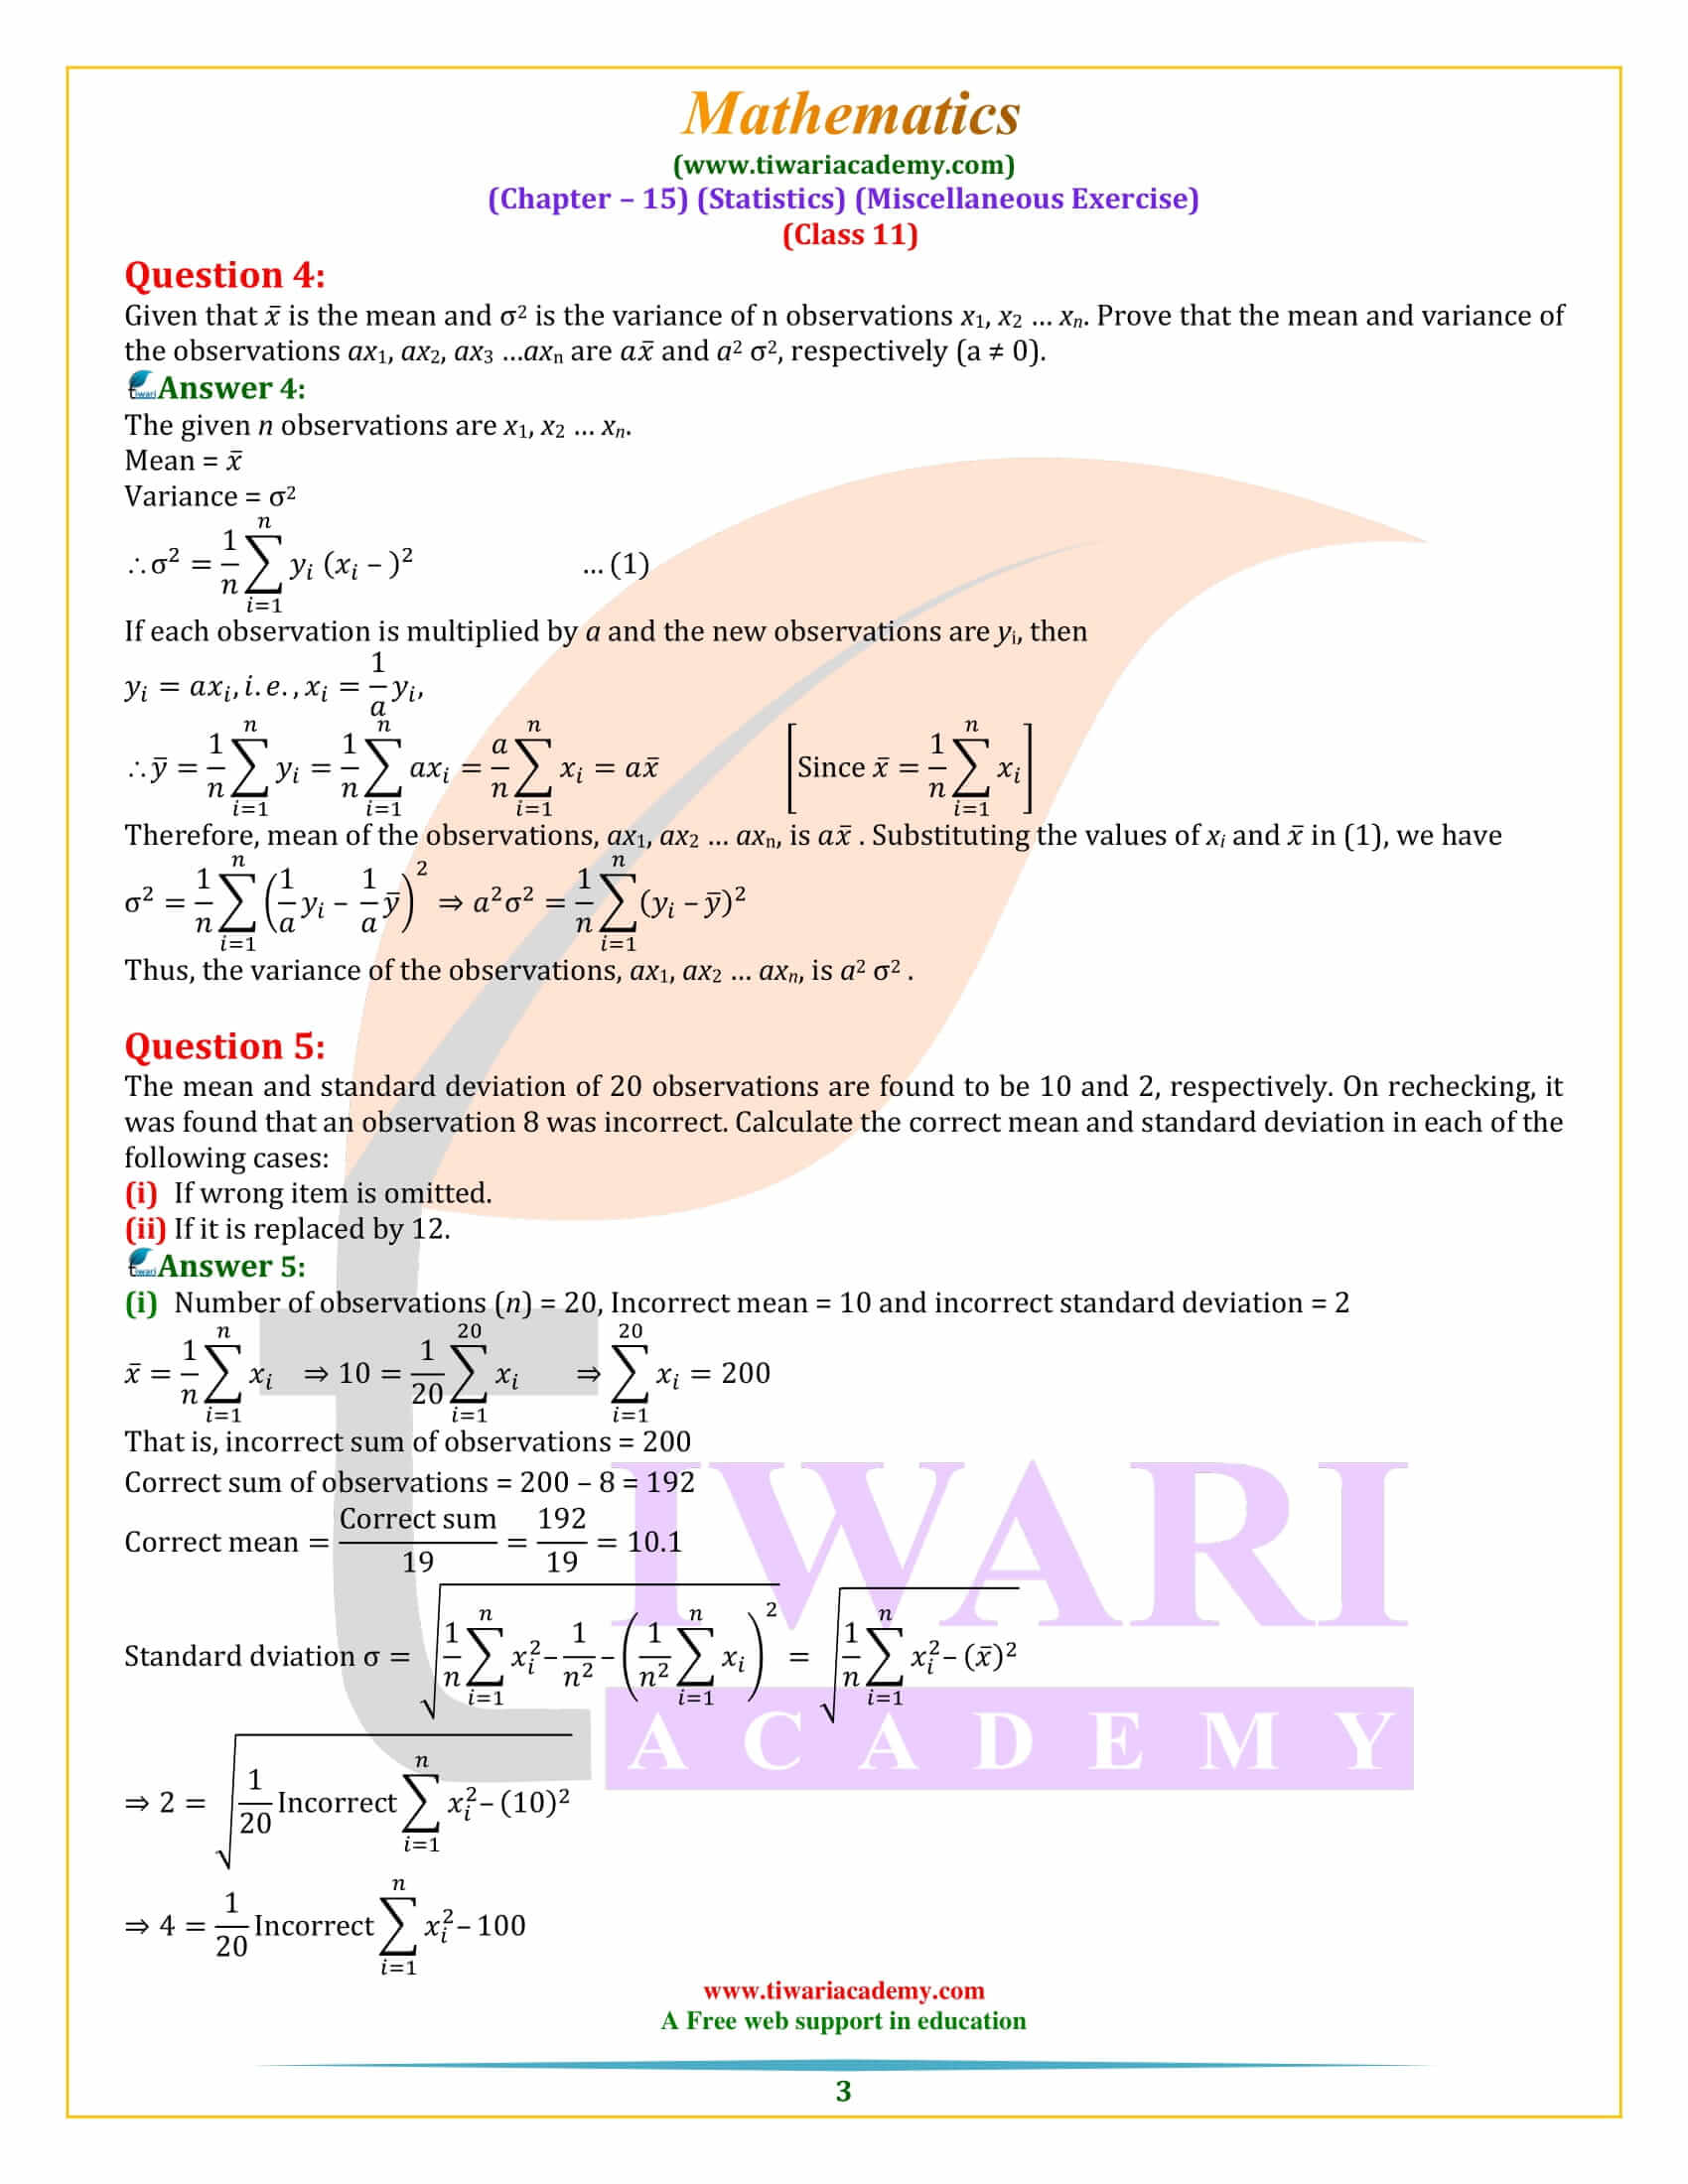 Class 11 Maths Chapter 15 Miscellaneous Exercise